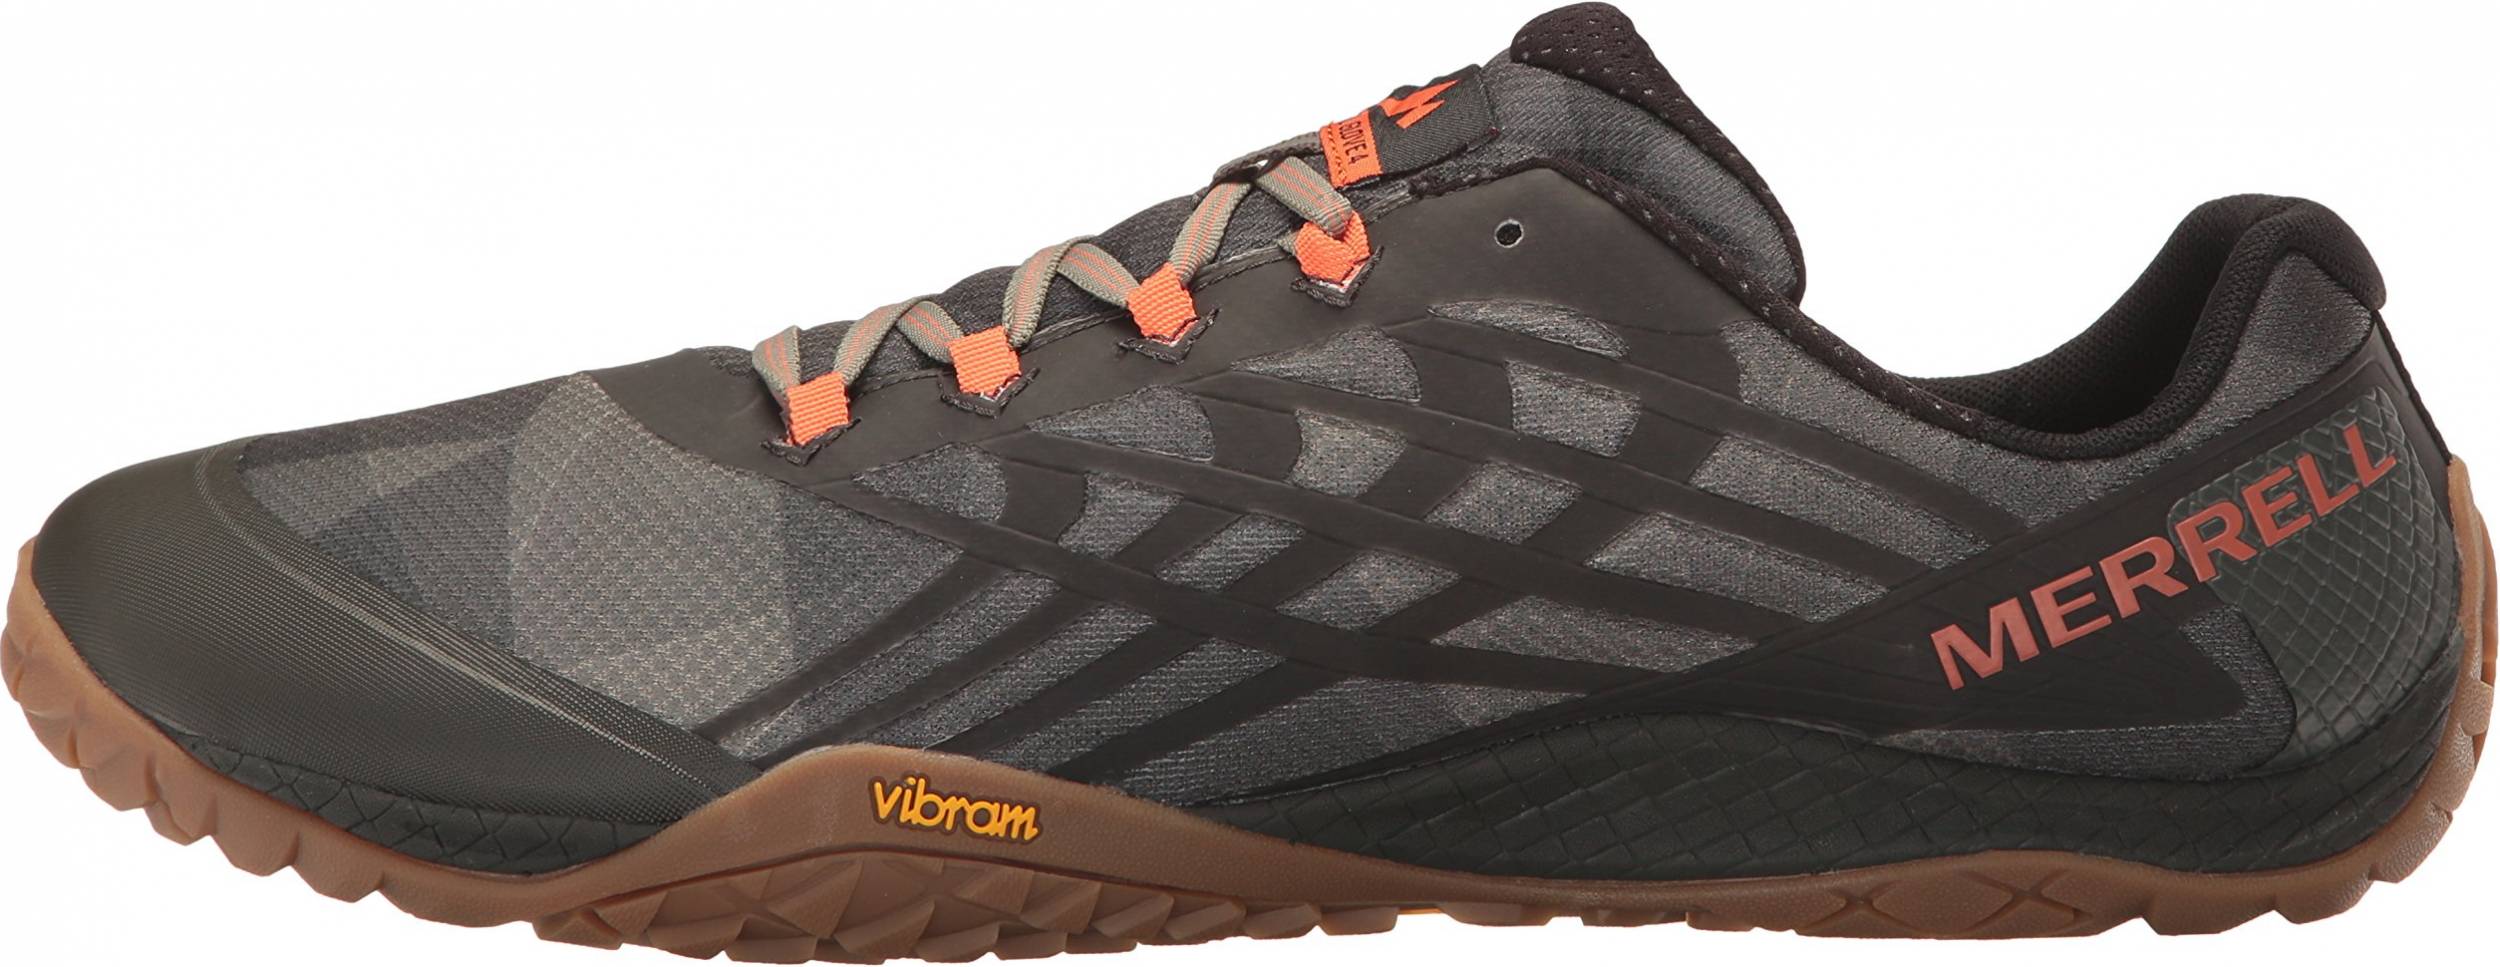 MERRELL Trail Glove 4 J17023 Barefoot Trail Running Trainers Athletic Shoes Mens 